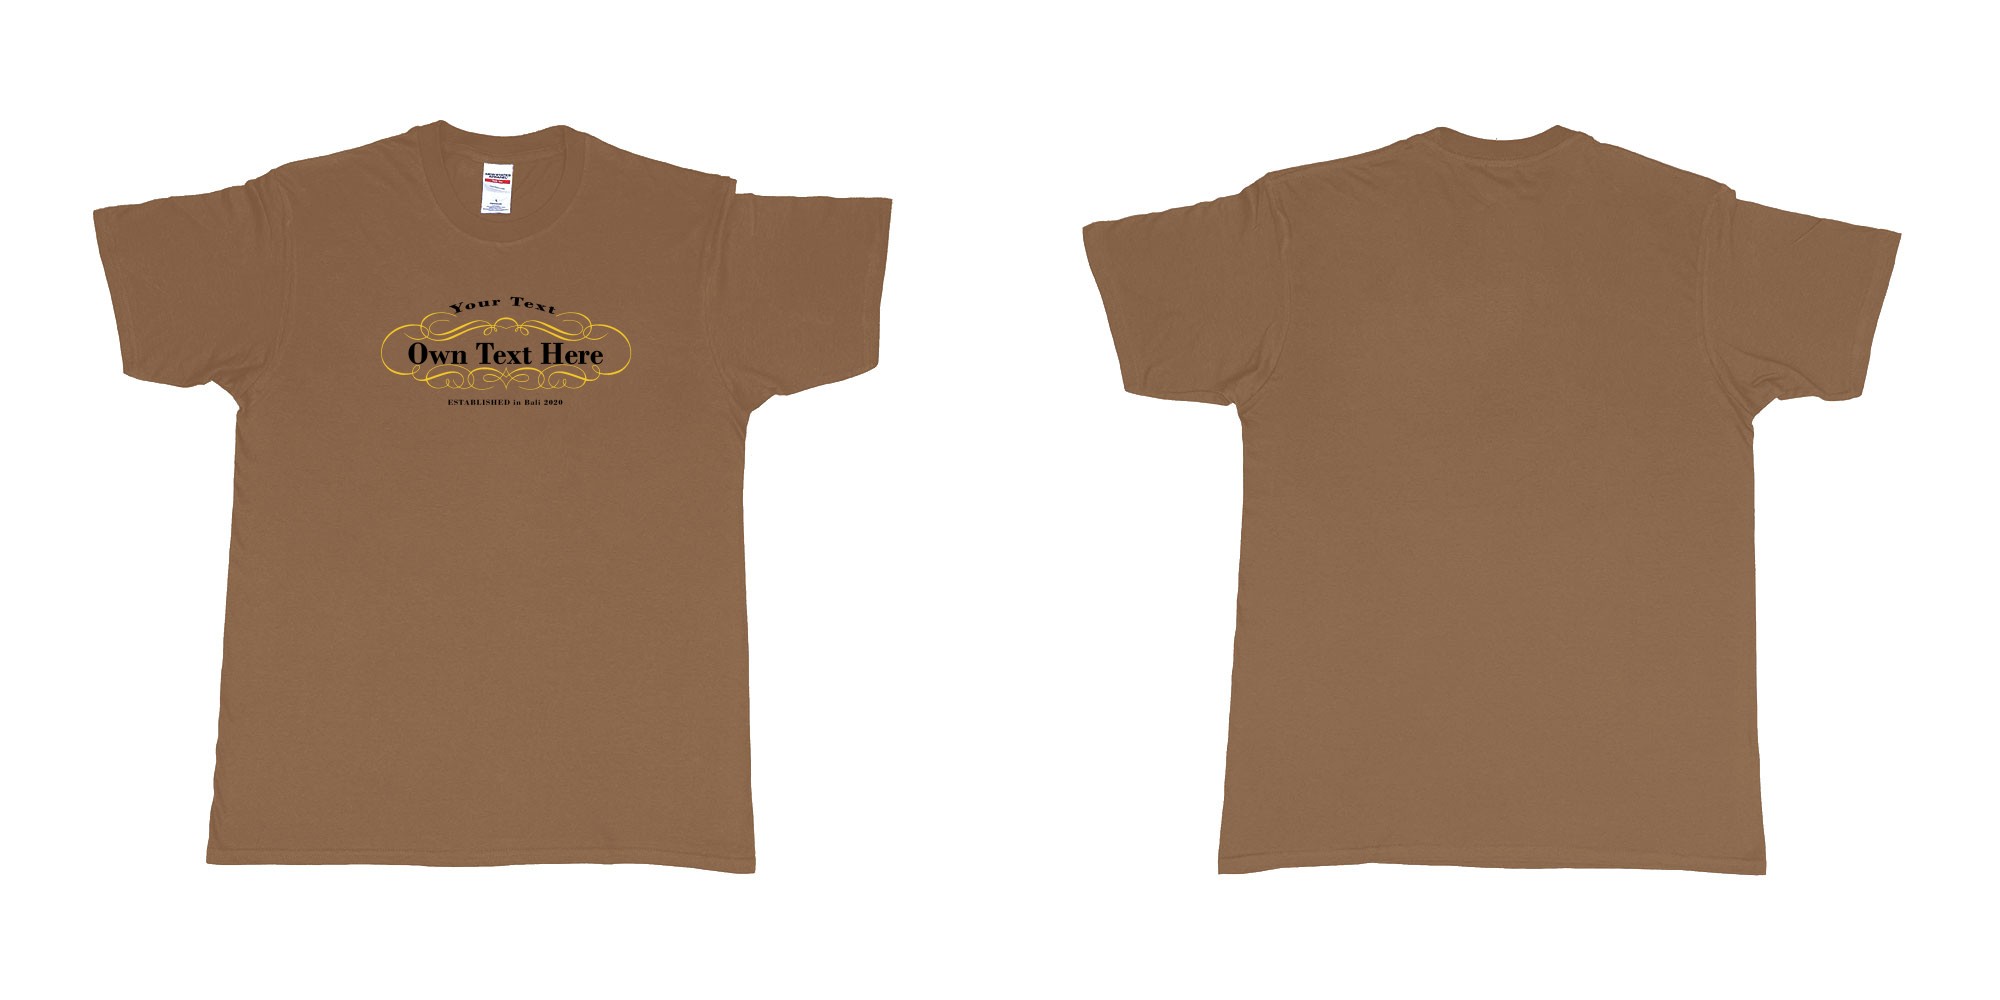 Custom tshirt design Laurent perrier in fabric color chestnut choice your own text made in Bali by The Pirate Way